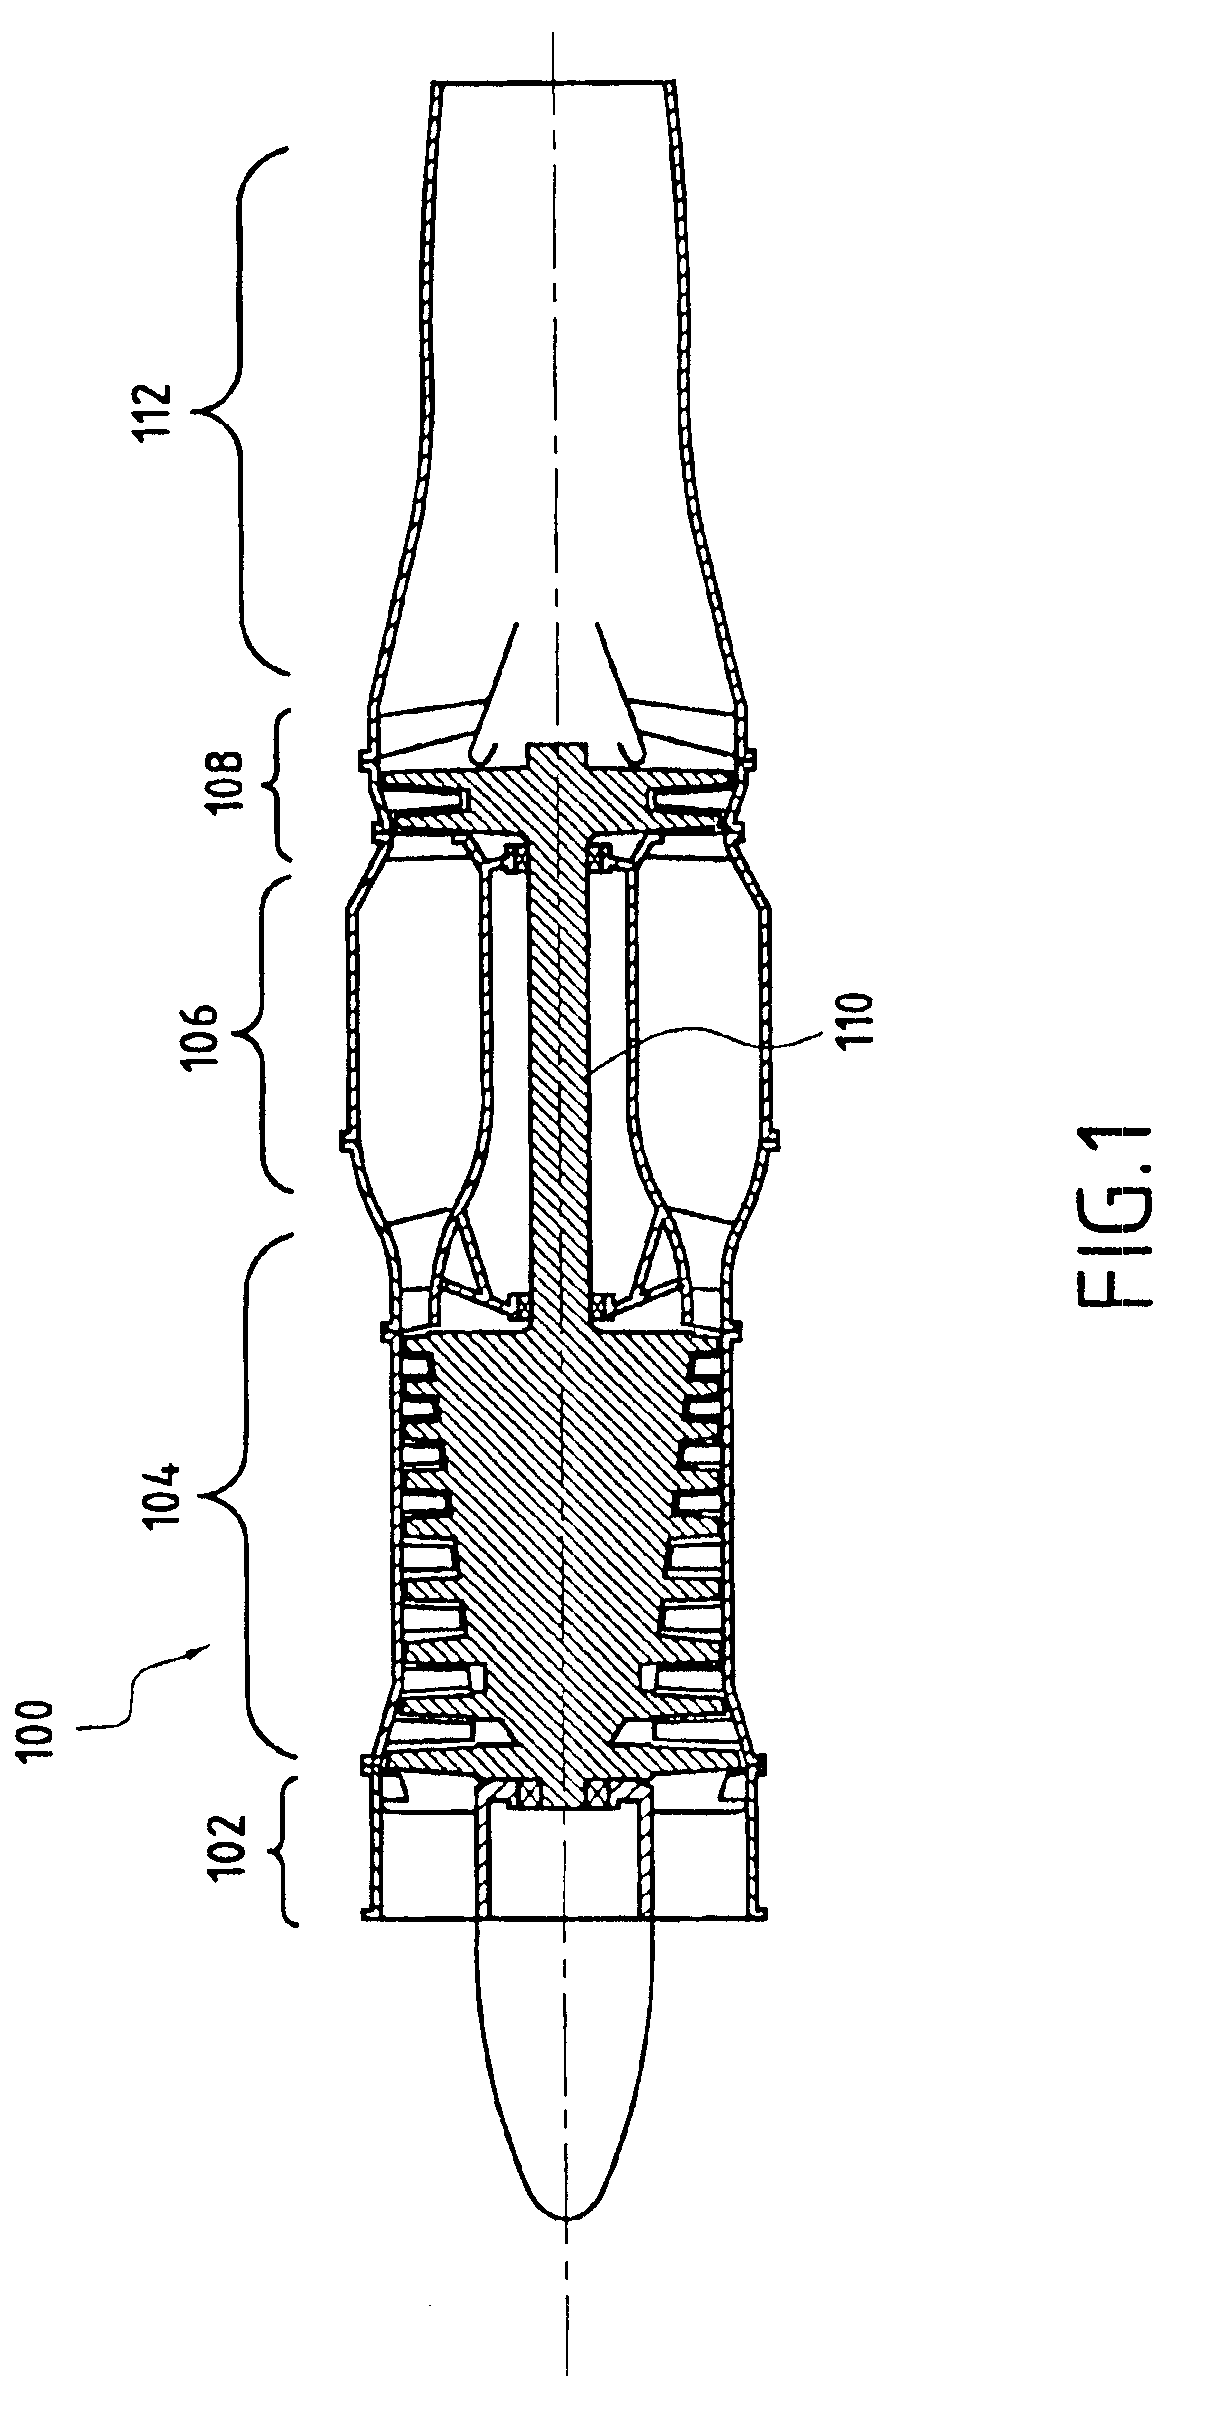 Casing, a compressor, a turbine, and a combustion turbine engine including such a casing